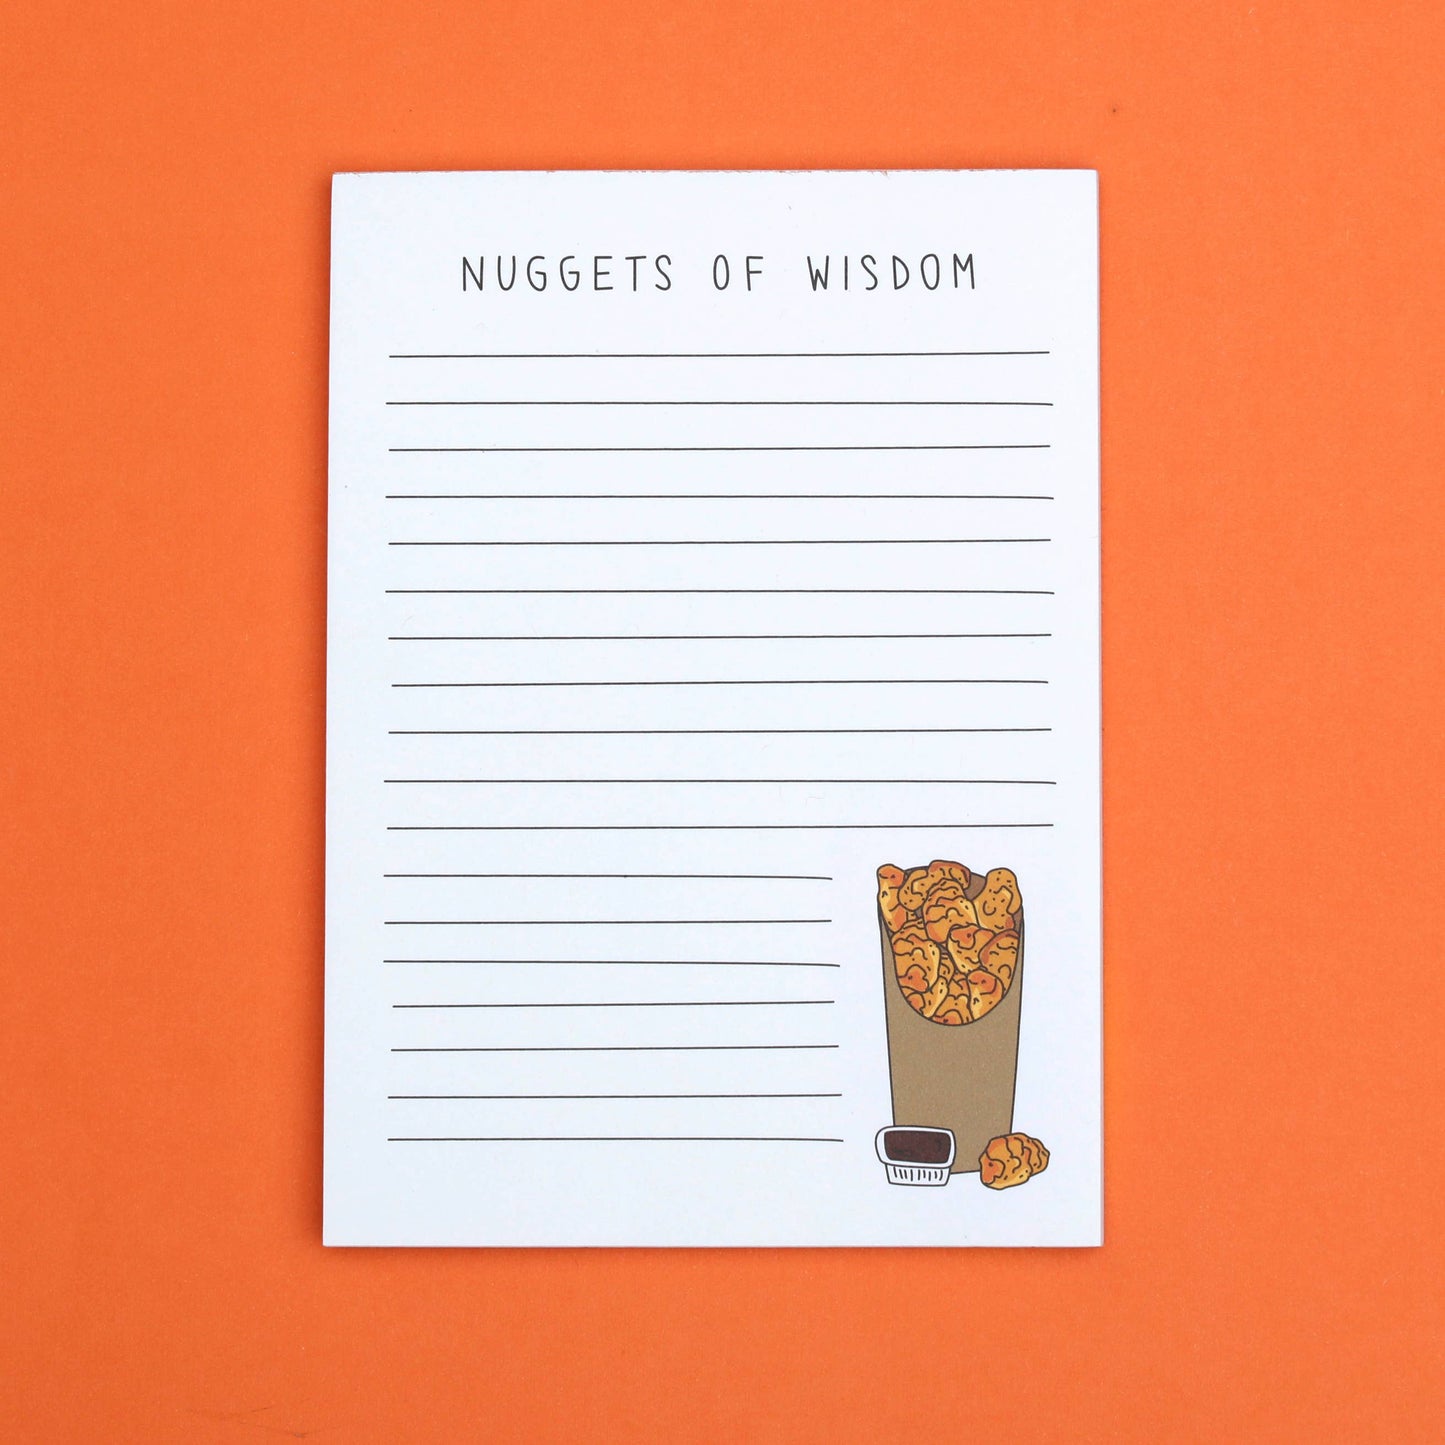 Lined notepad that reads "Nuggets of Wisdom" up top and has chicken nuggets in the bottom right corner 